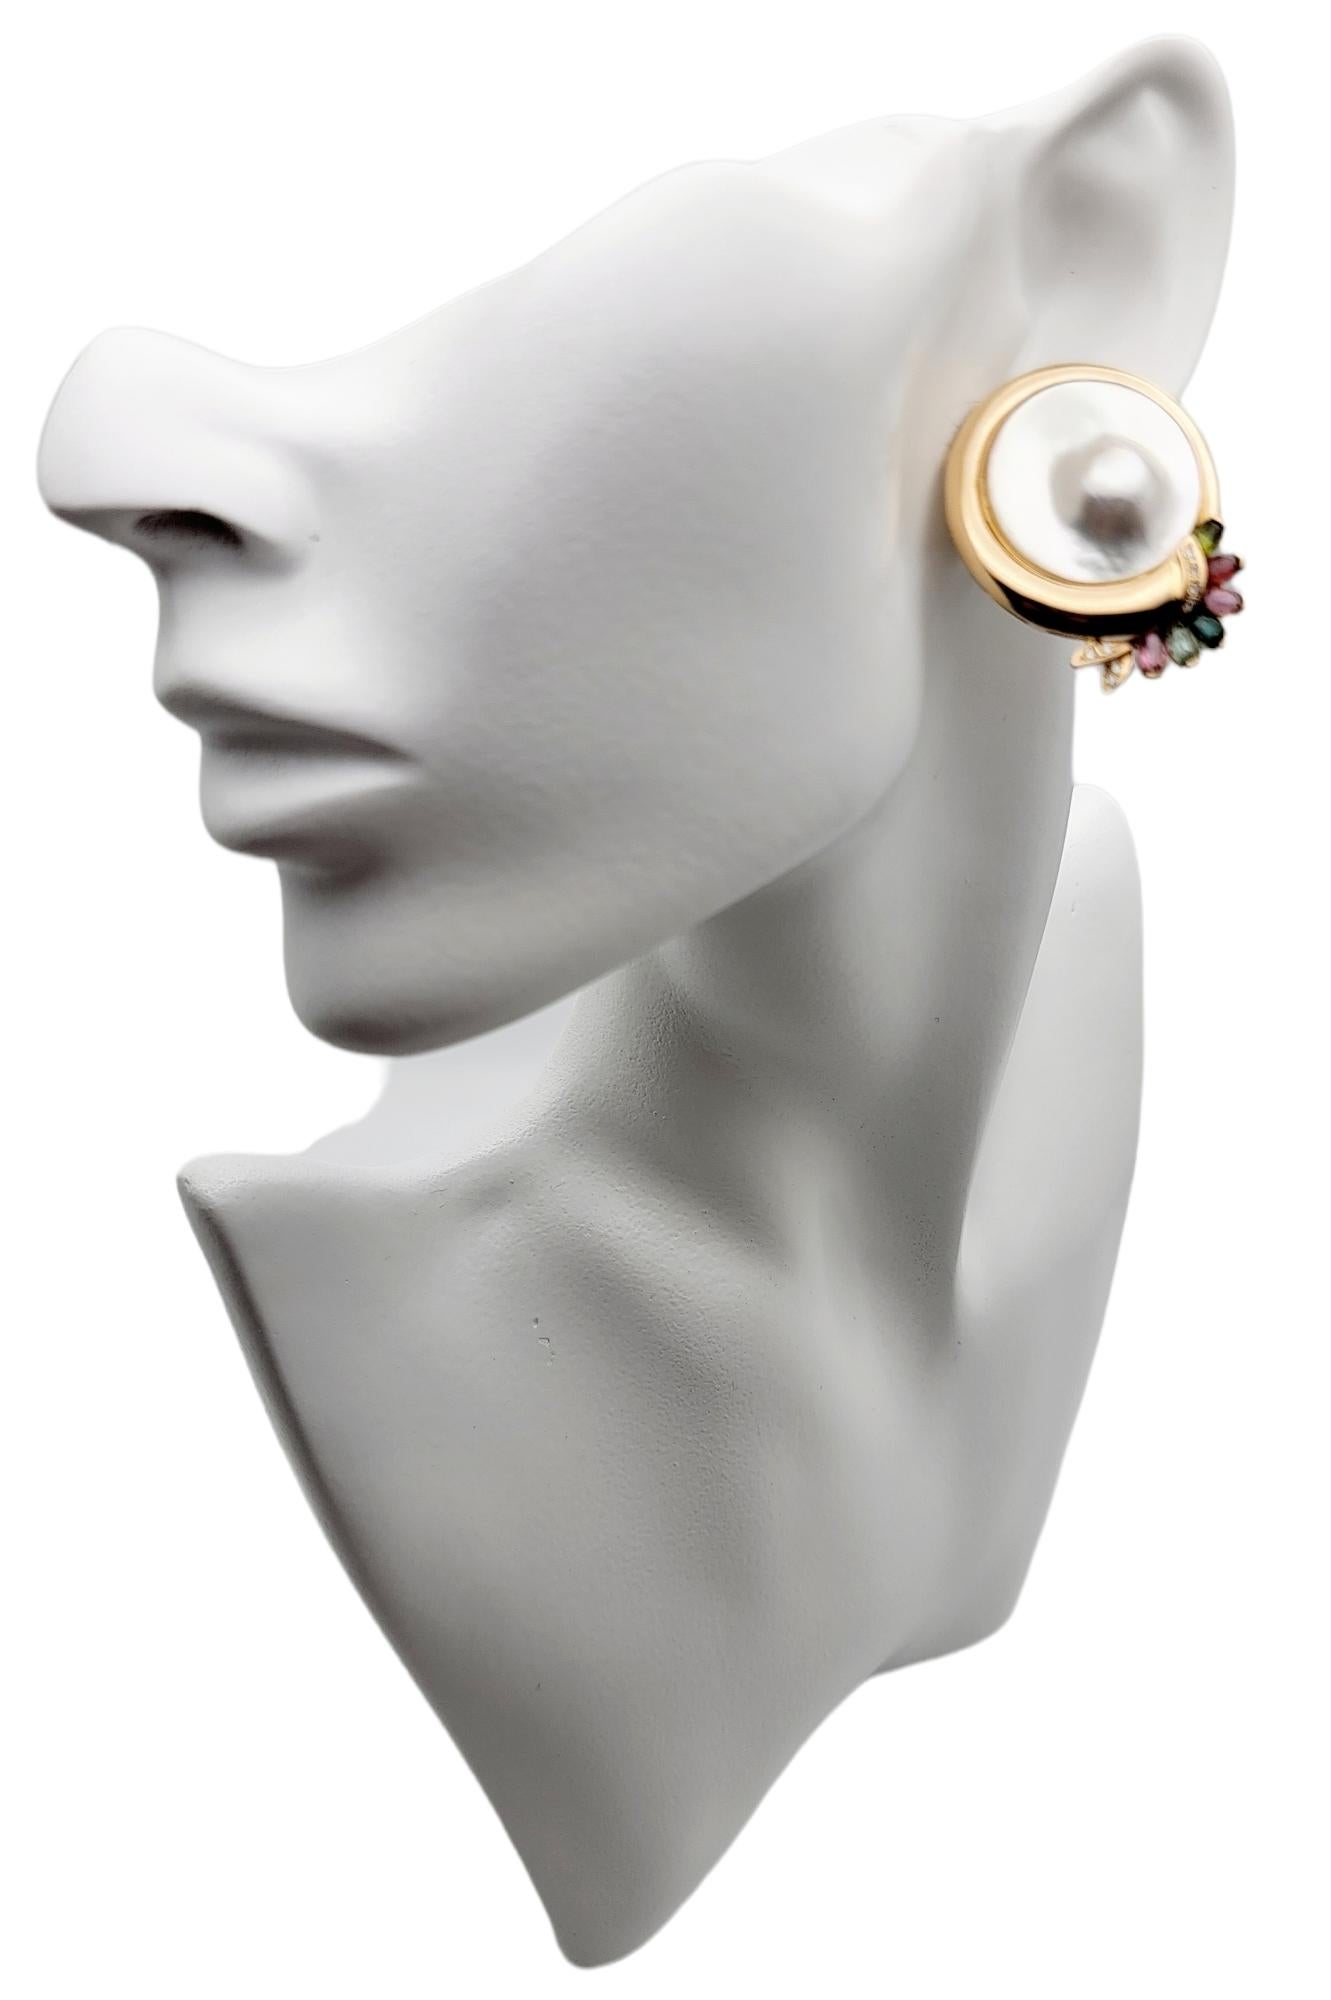 Cultured Mabe Blistered Pearl 14 Karat Gold Earrings with Diamonds and Gemstones For Sale 2